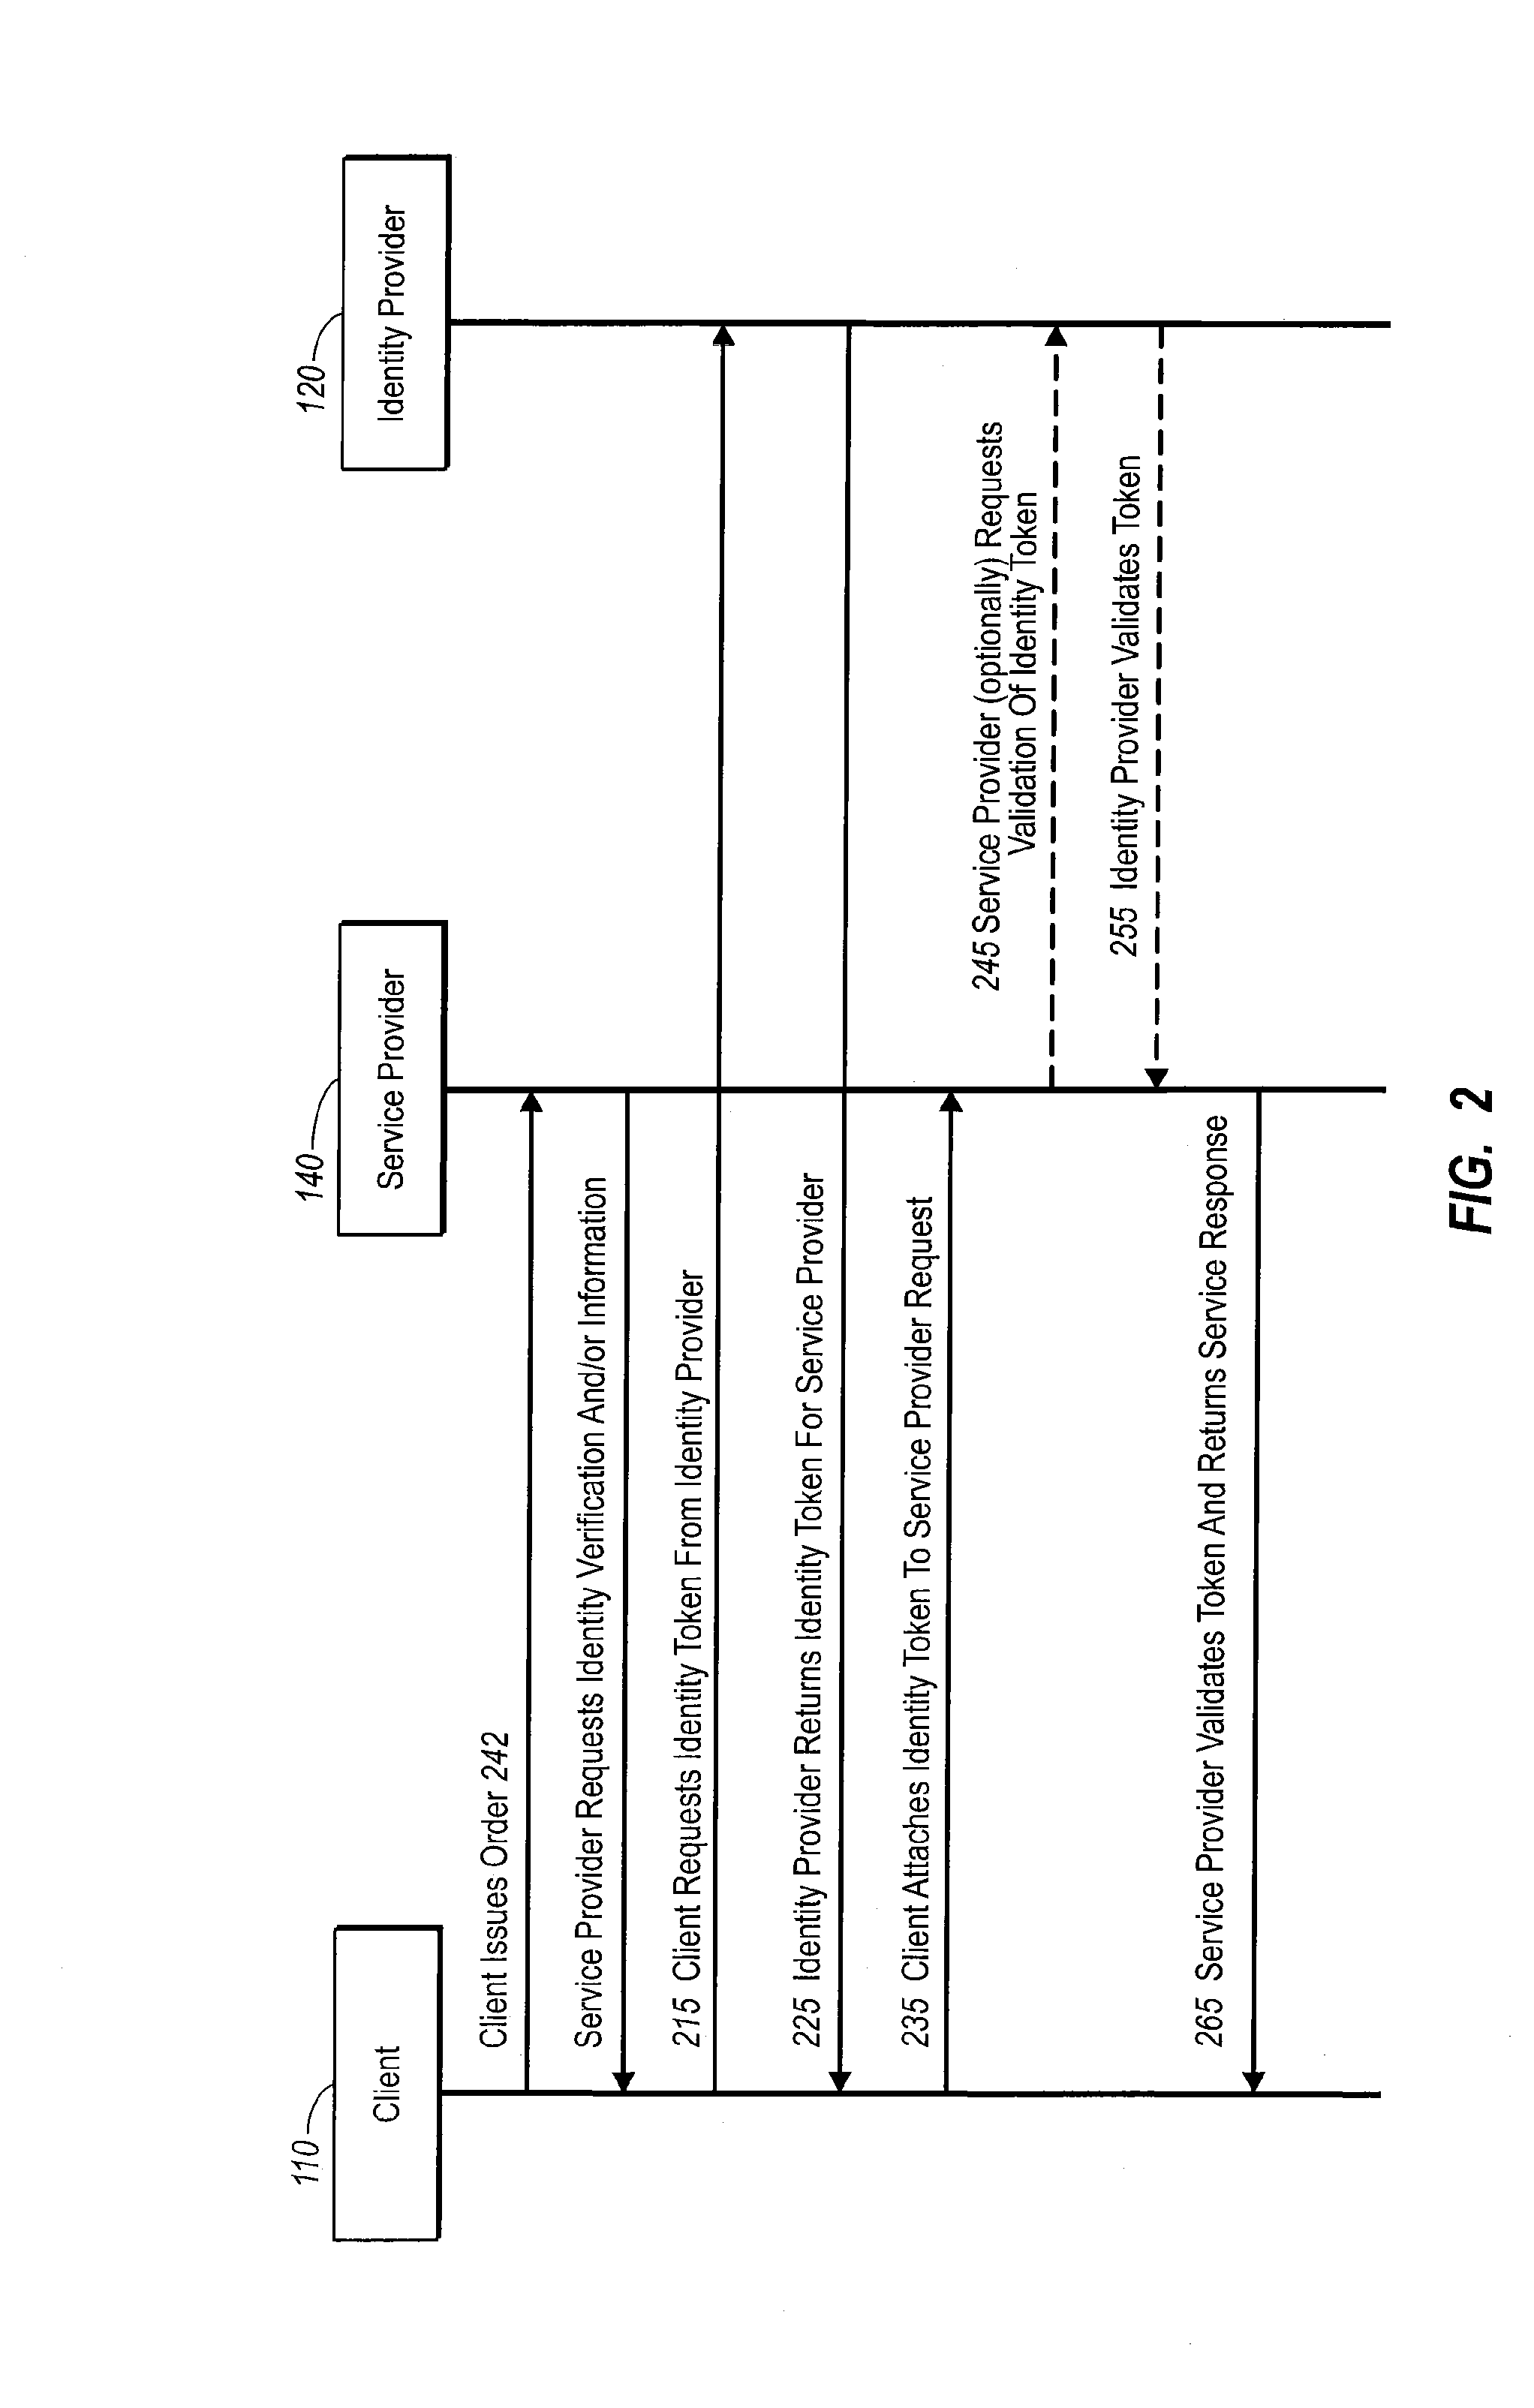 Authentication for a commercial transaction using a mobile module